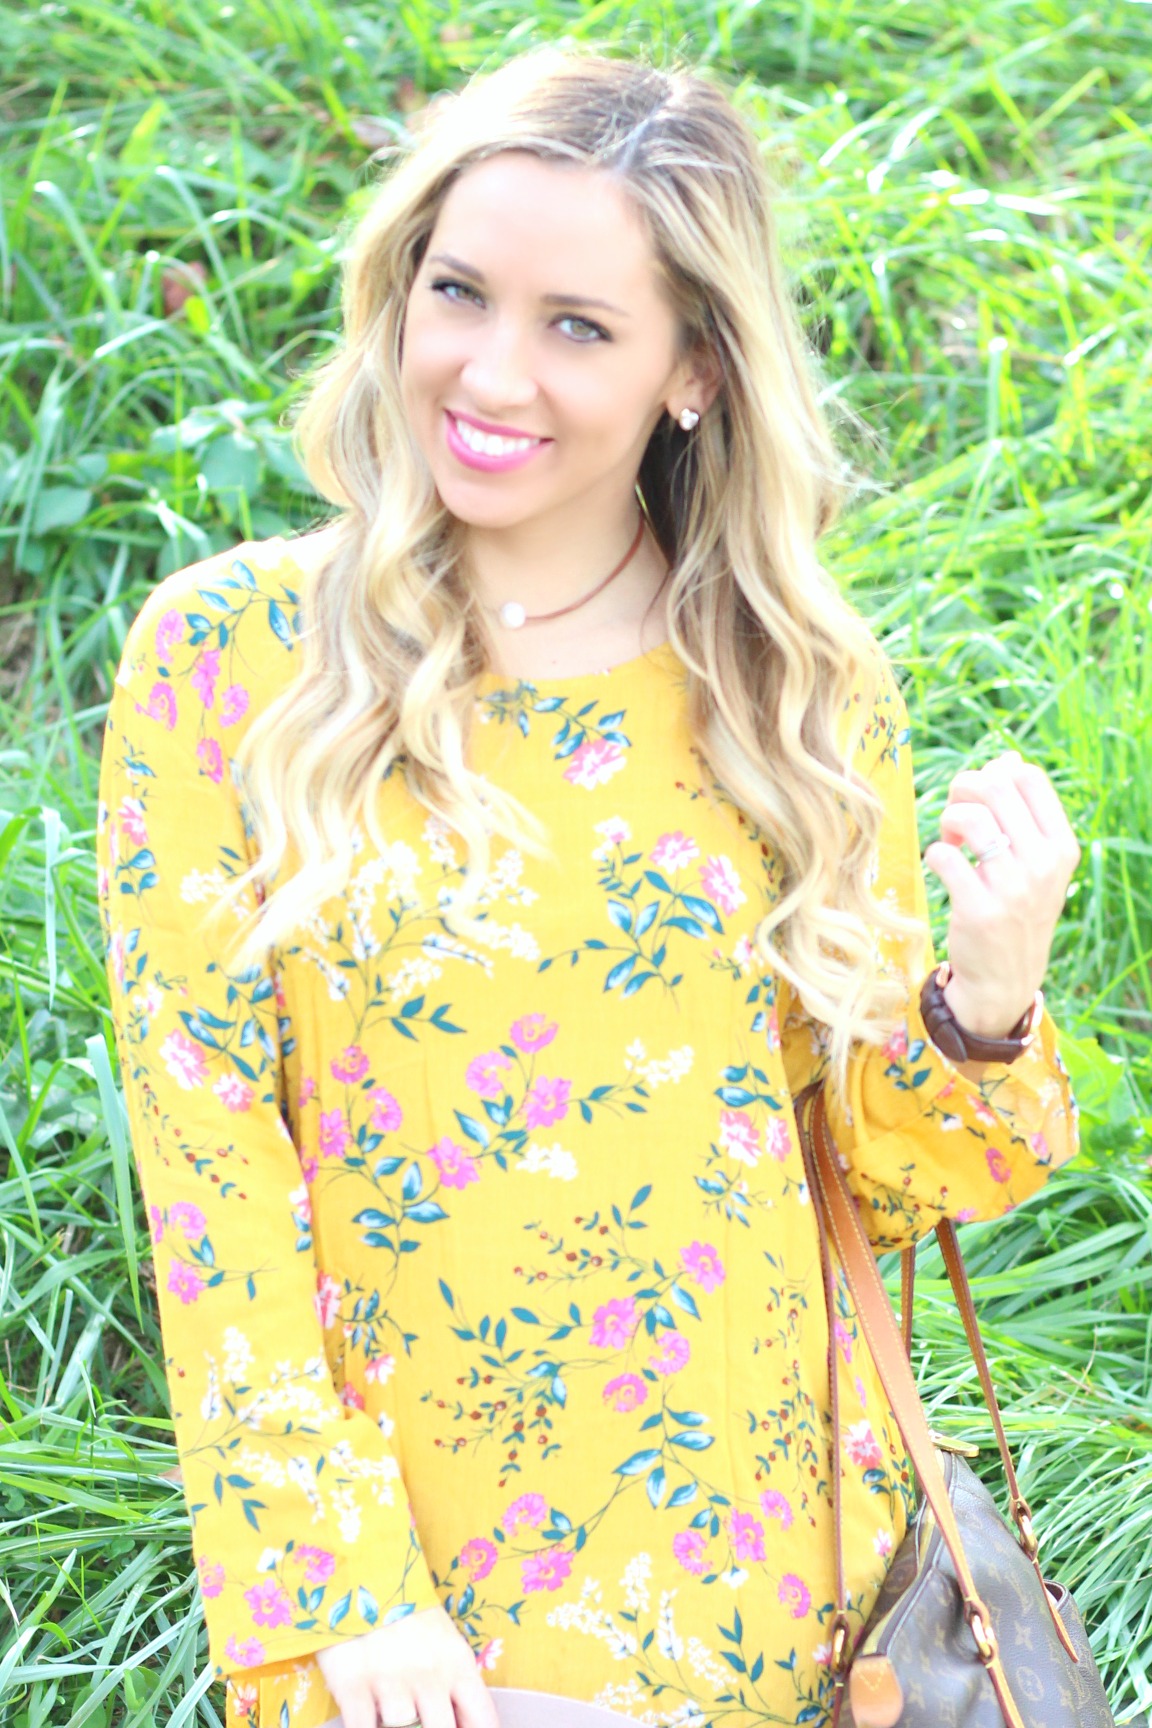 Yellow Floral Dress & Tory Burch Riding Boots - According to Blaire